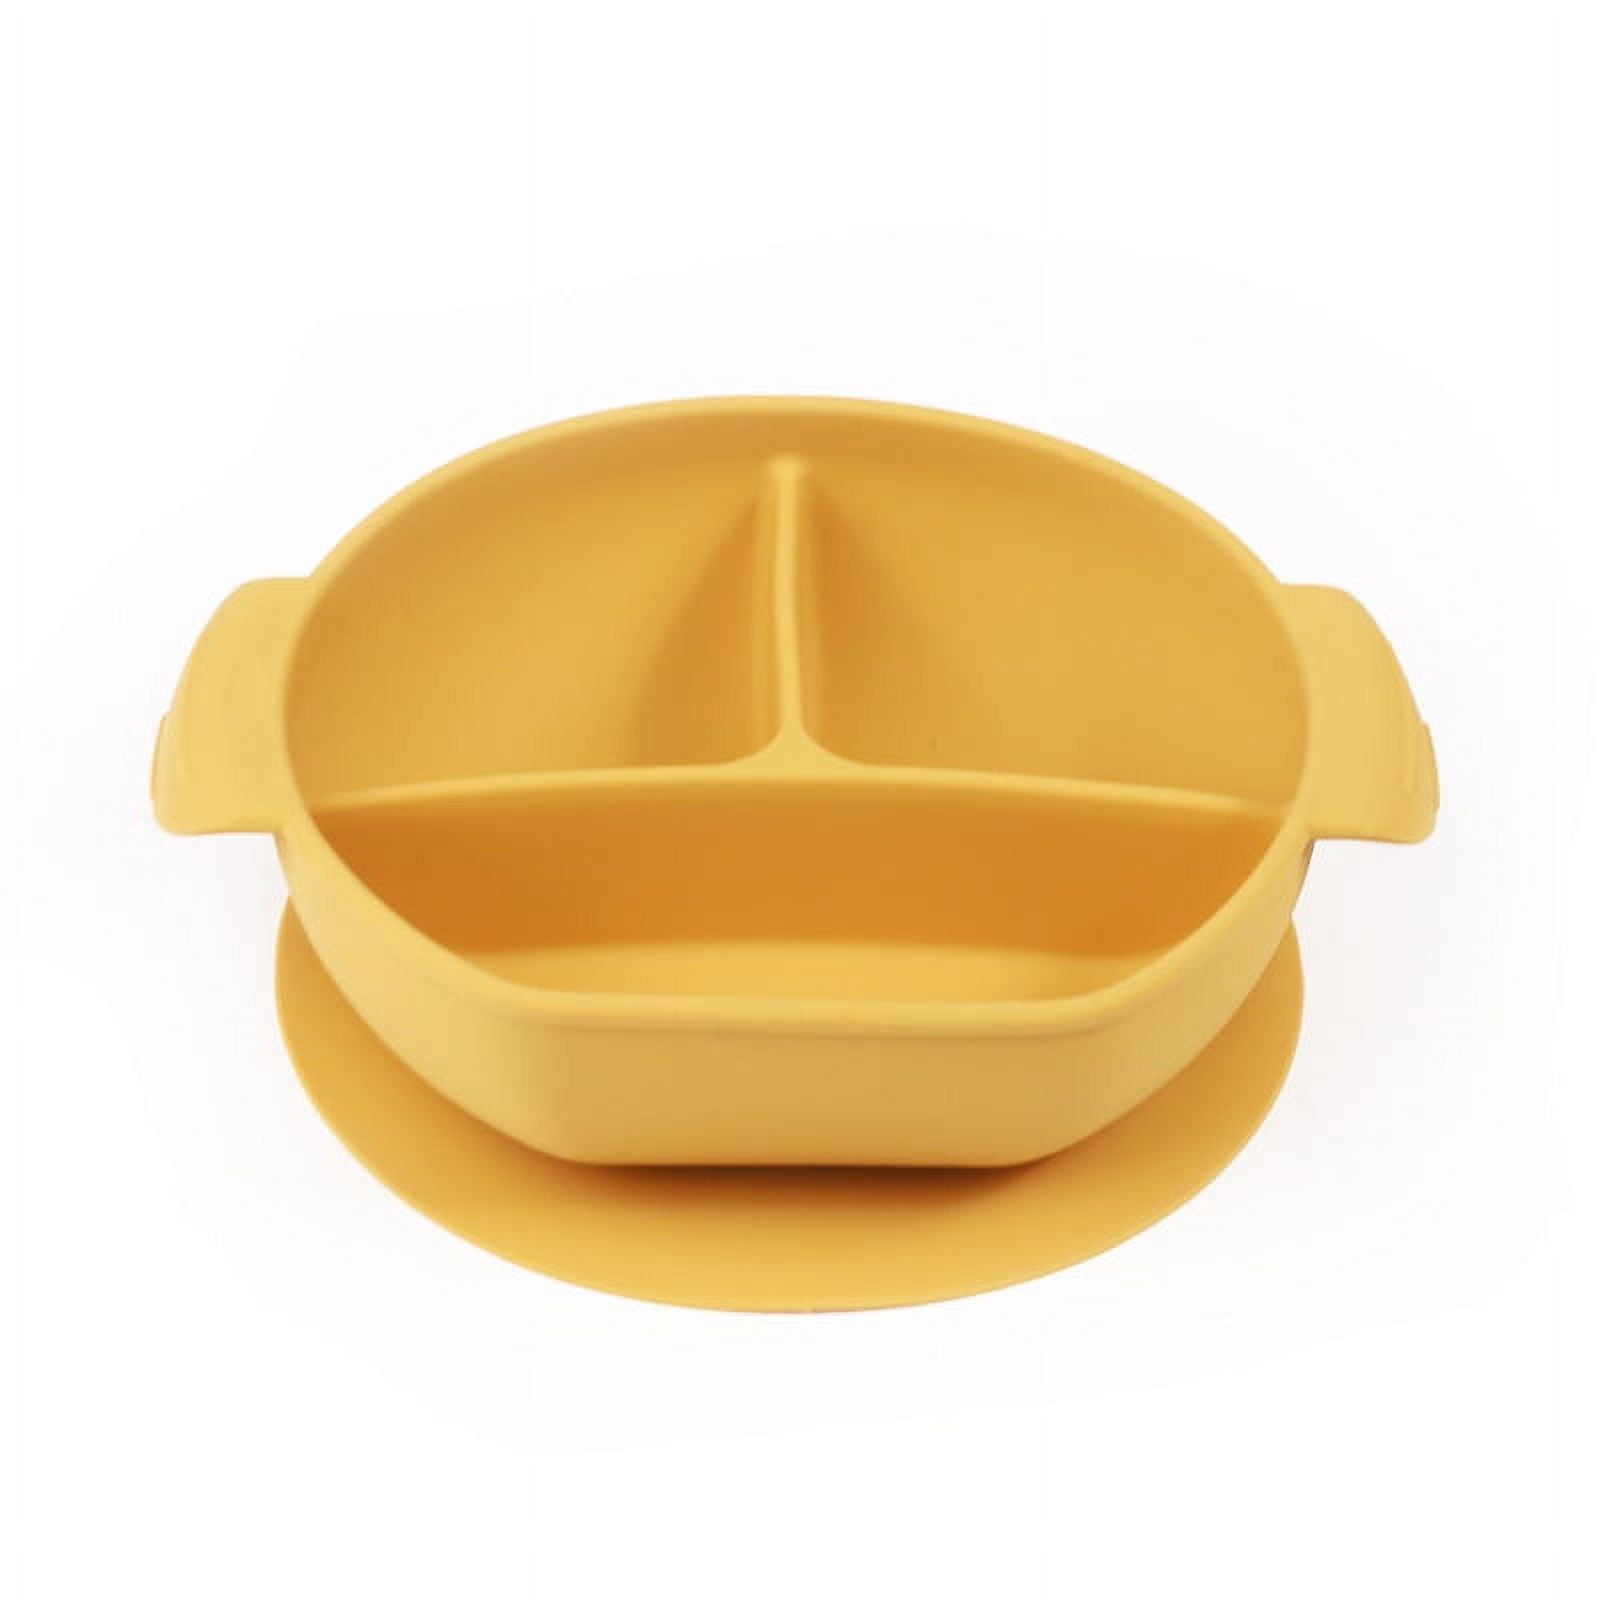 Silicone bowl, Suction, oven-safe bowls for baby, kids